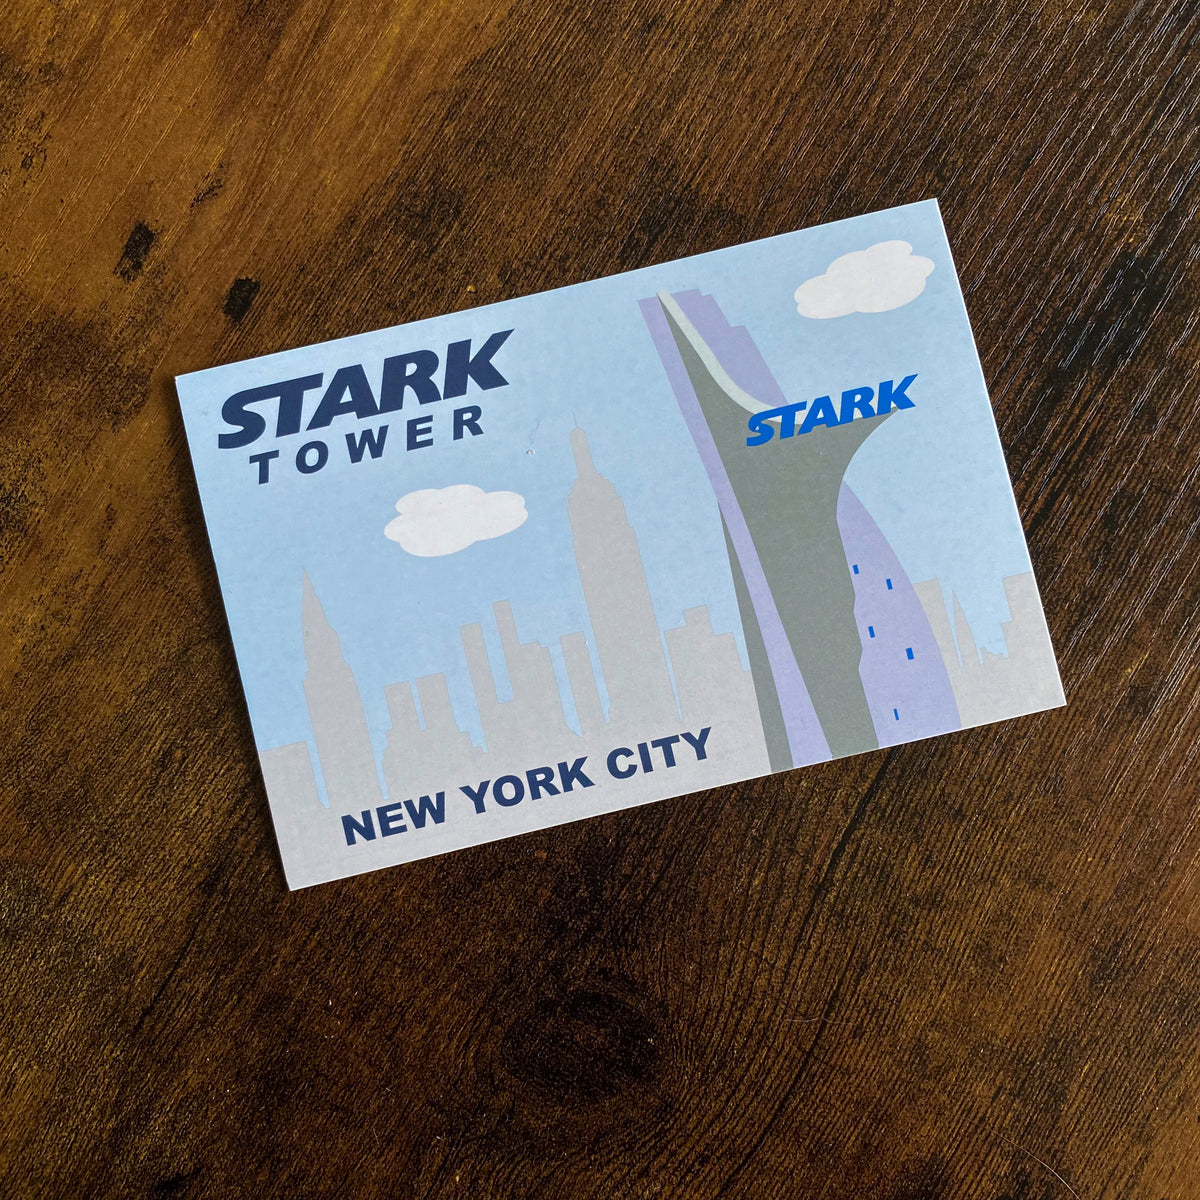 Where is Stark Tower in New York?